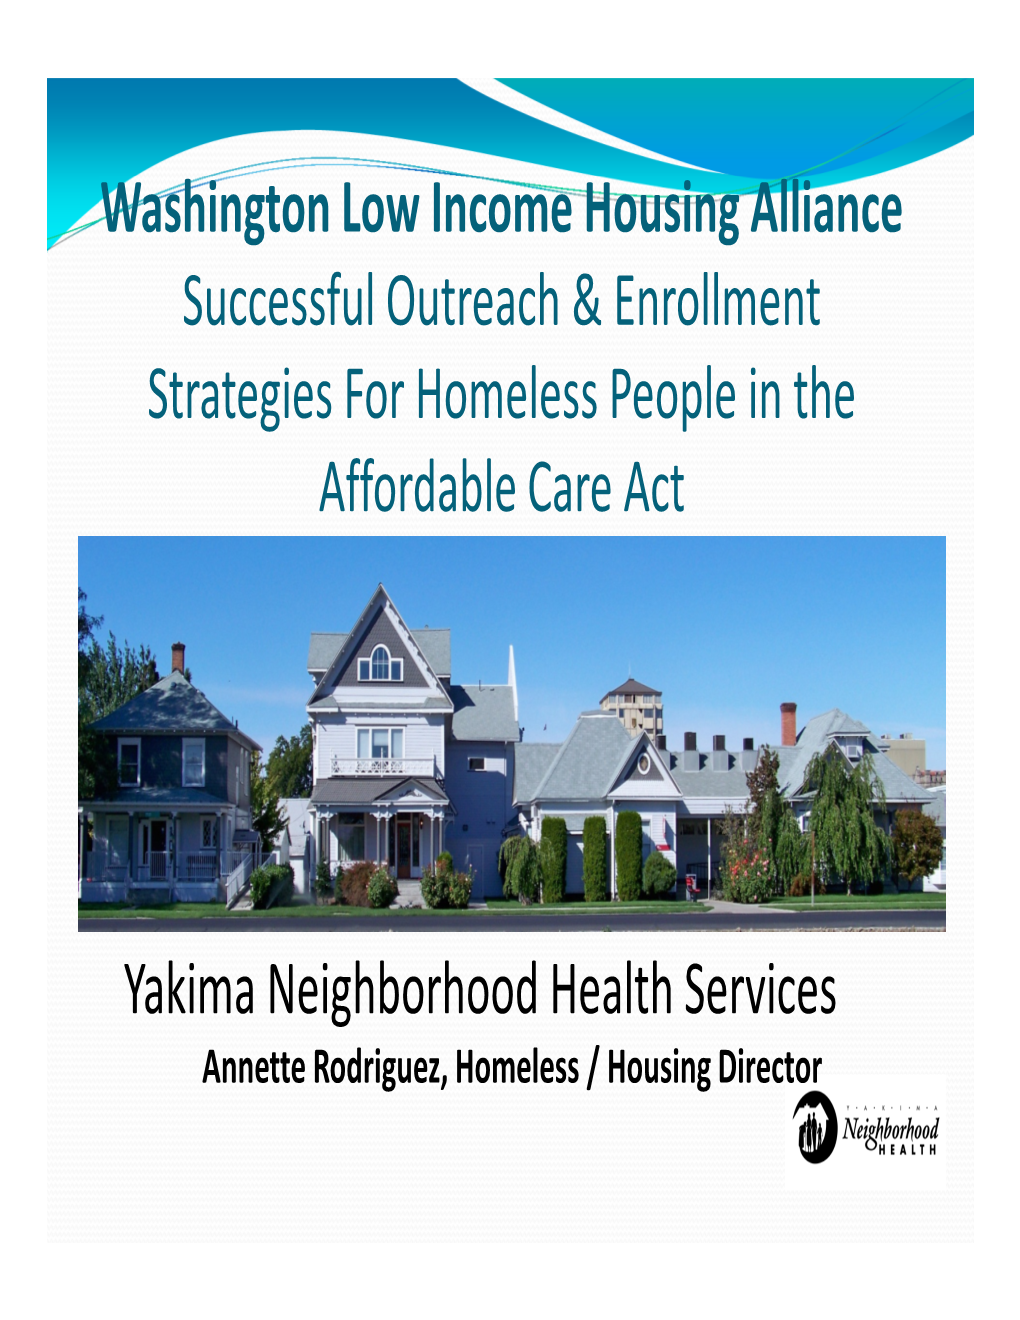 Washington Low Income Housing Alliance Successful Outreach & Enrollment Strategies for Homeless People in the Affordable Care Act